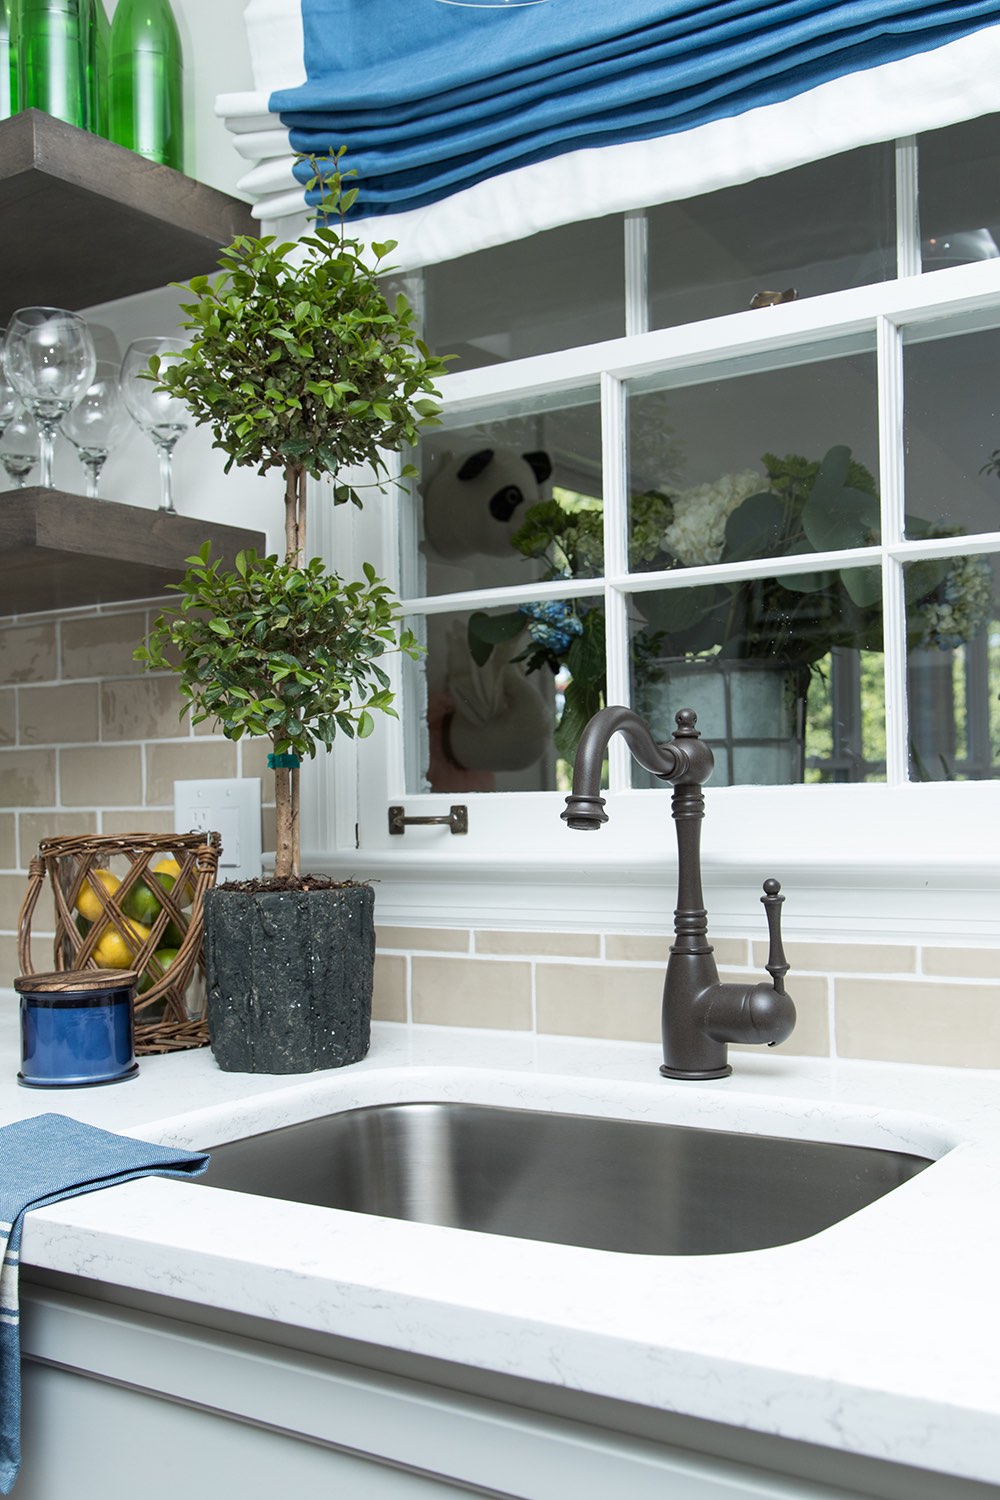 Kitchen sink with topiary and jar of lemons and limes